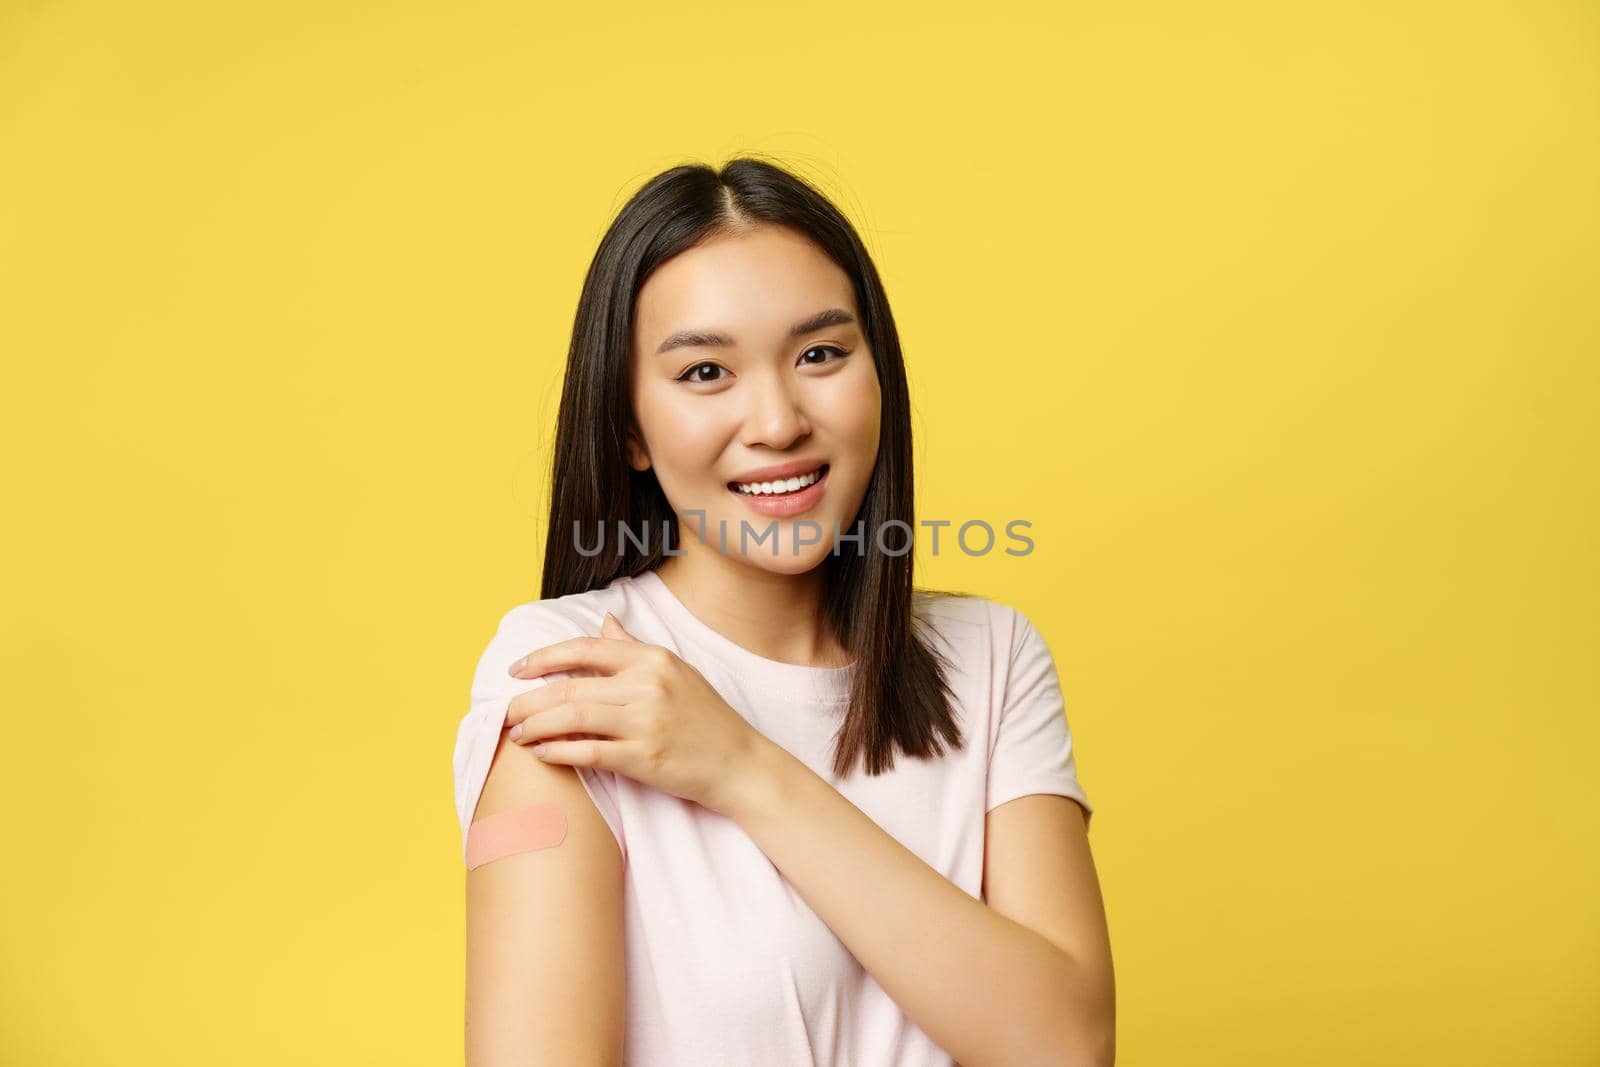 Covid-19 and healthcare medical concept. Smiling woman shows shoulder with patch, vaccinated from coronavirus, standing in t-shirt over yellow background.